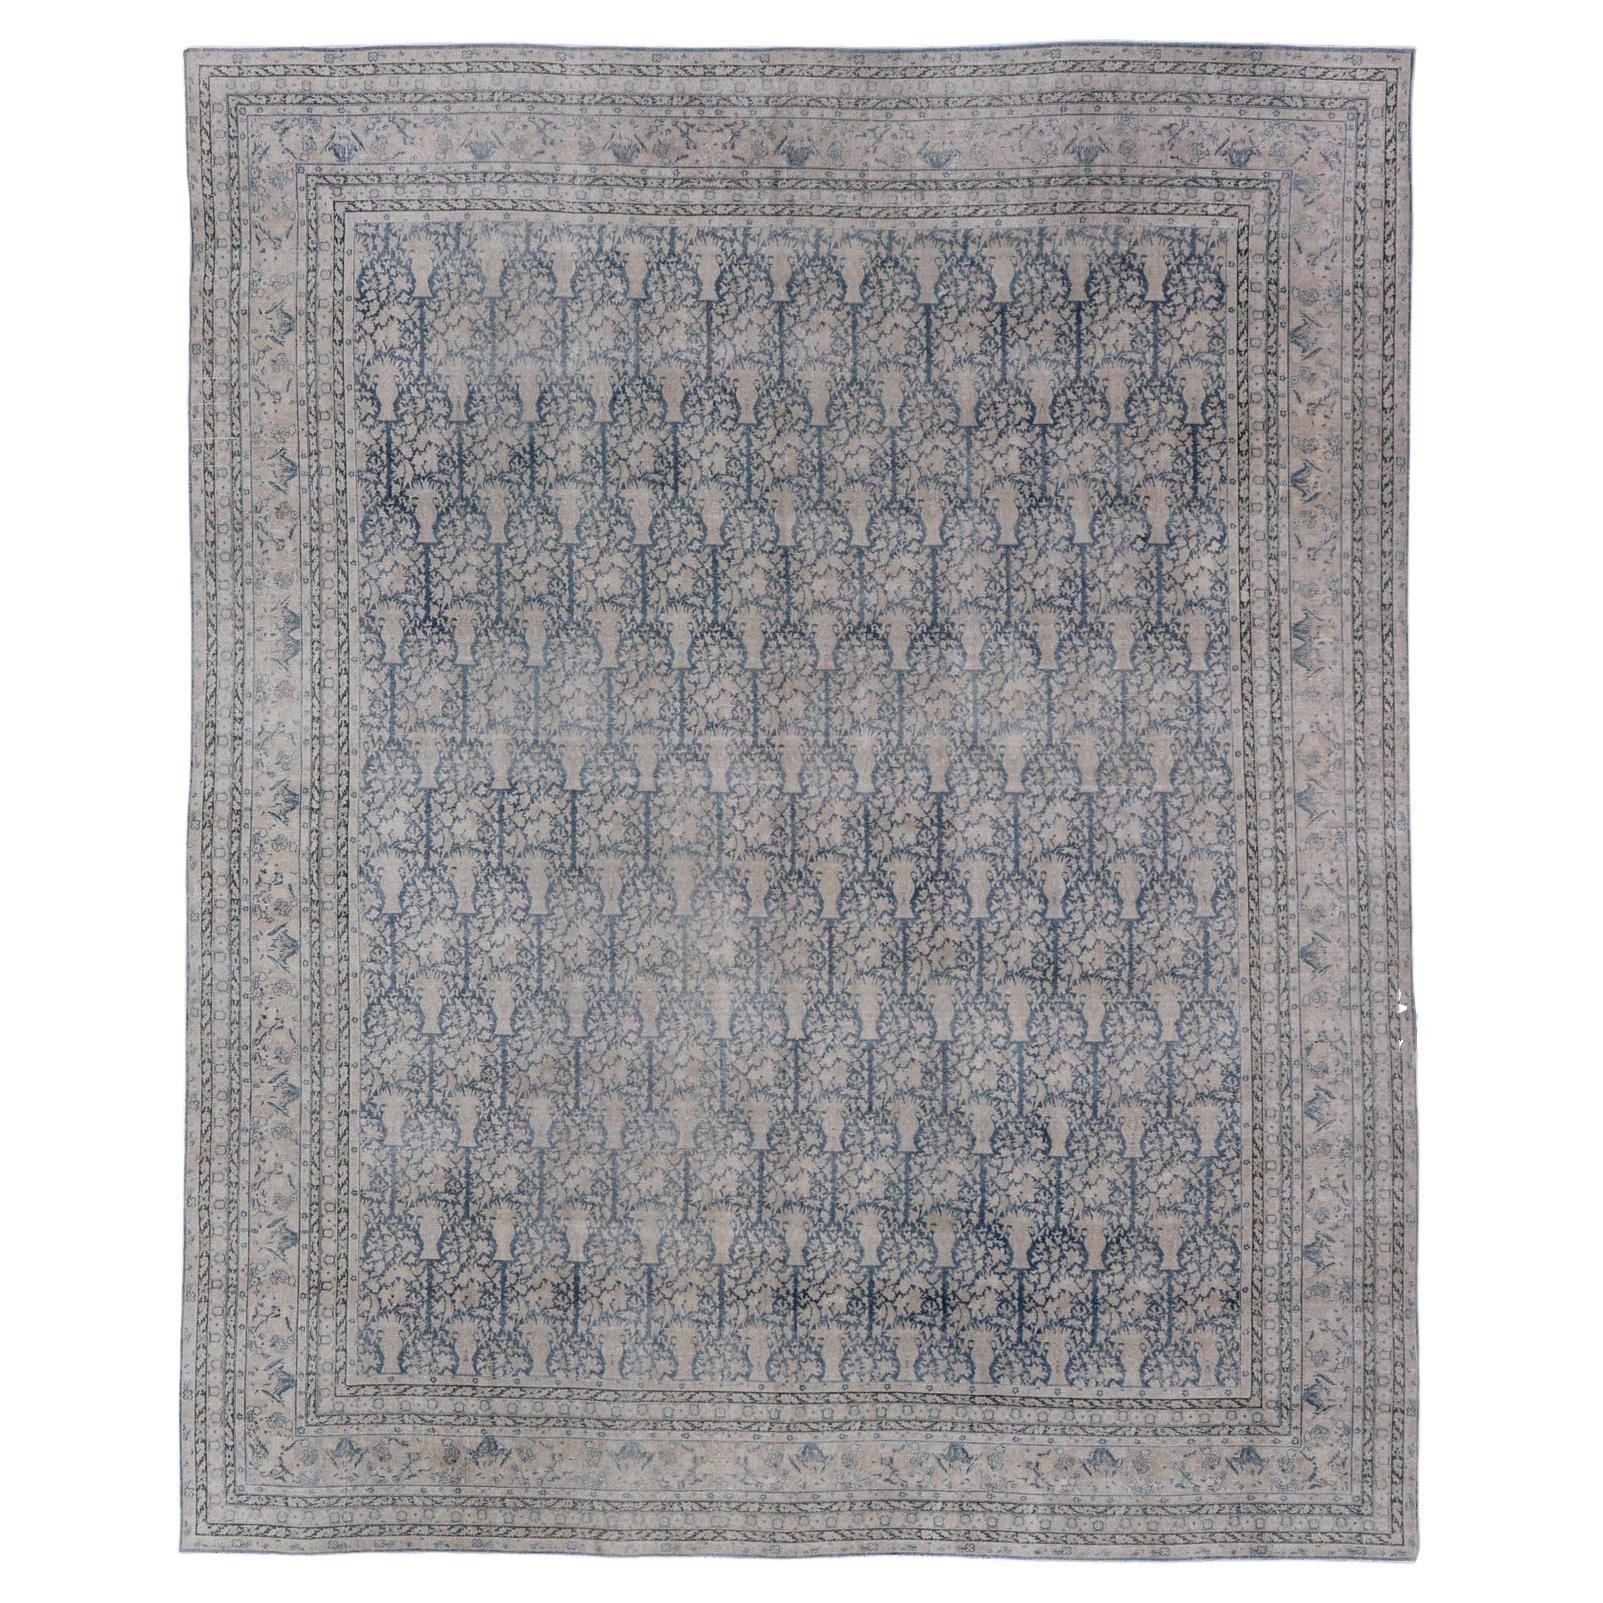 Large Antique Indian Agra Rug with All-Over Design in Light Blue and Cream 